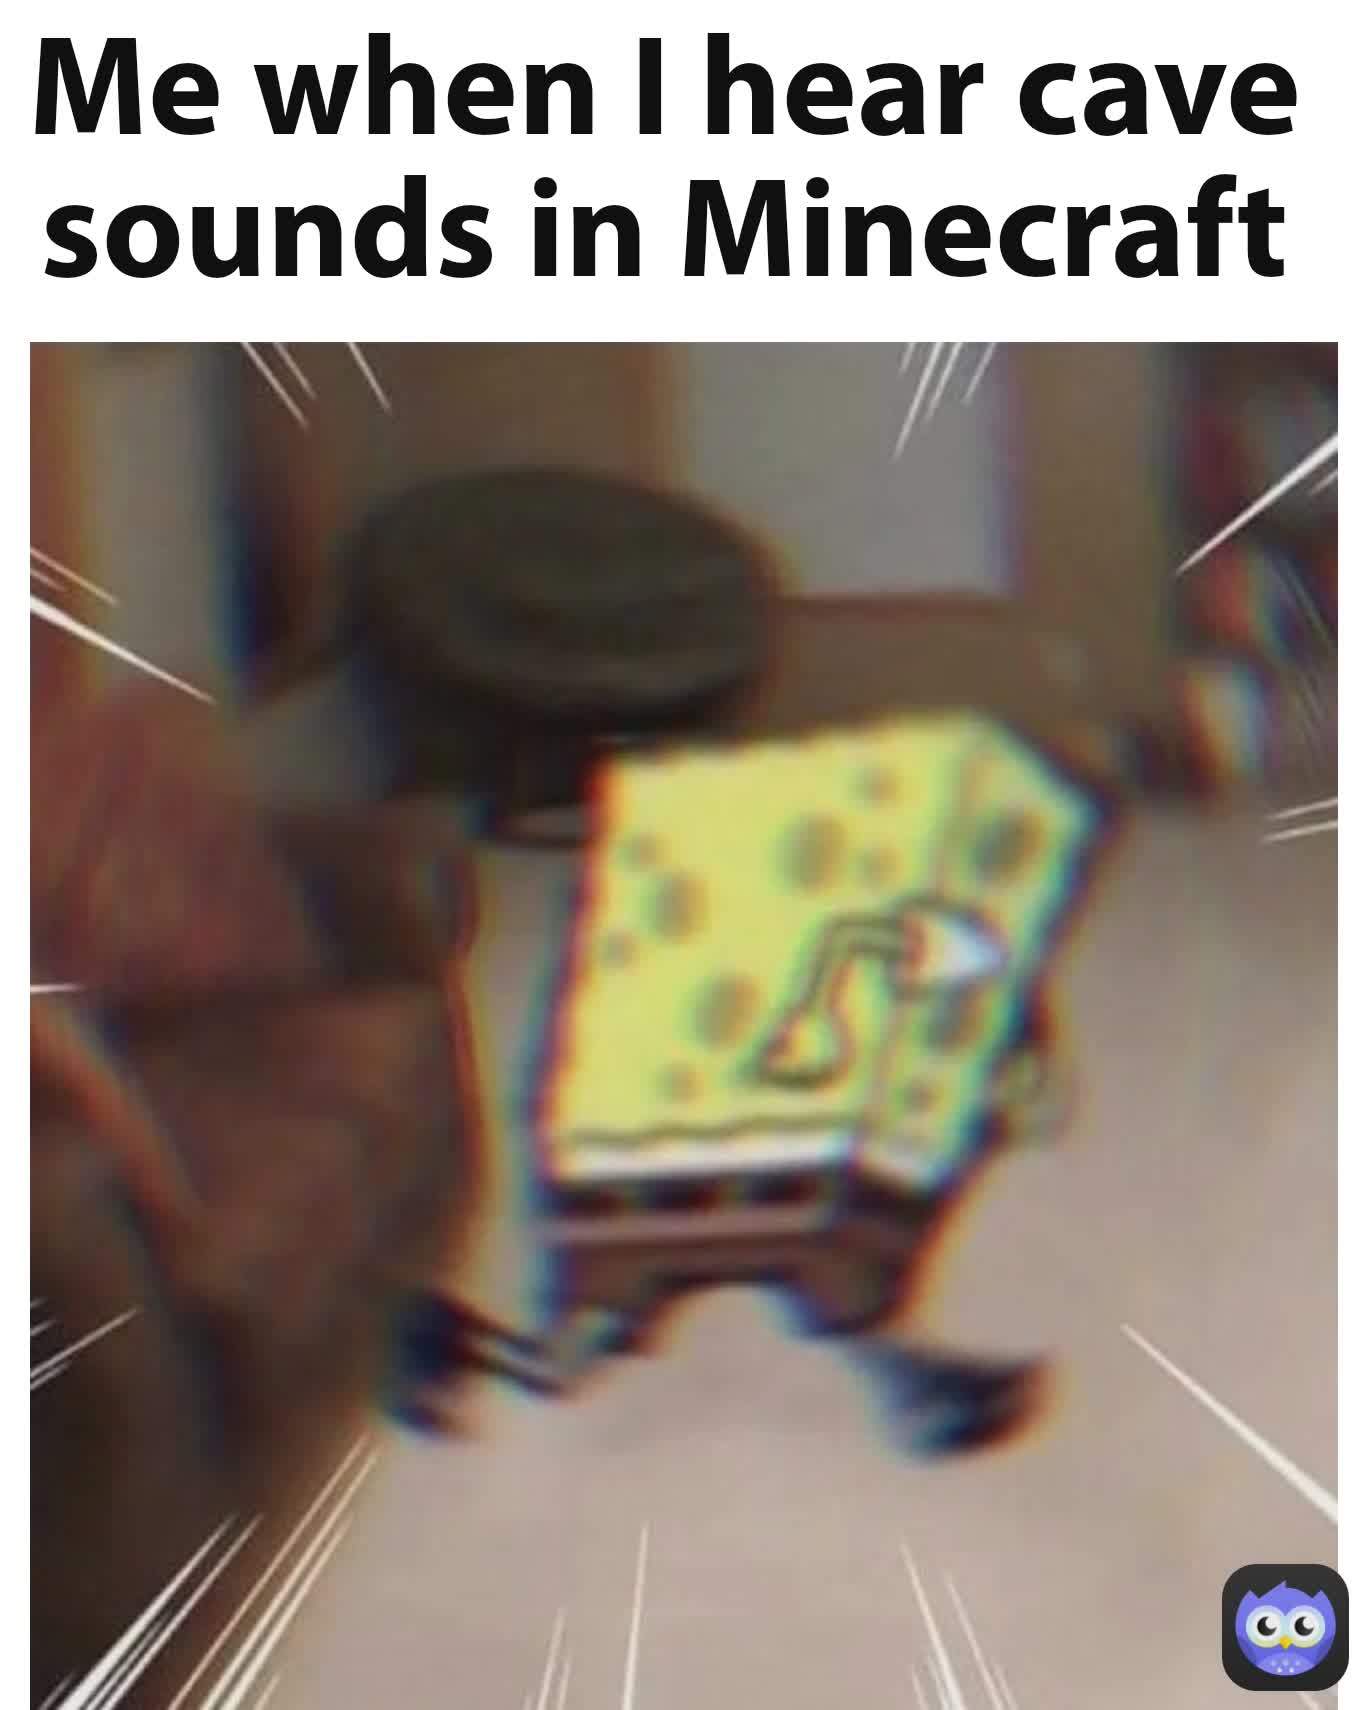 Me when I hear cave sounds in Minecraft - meme